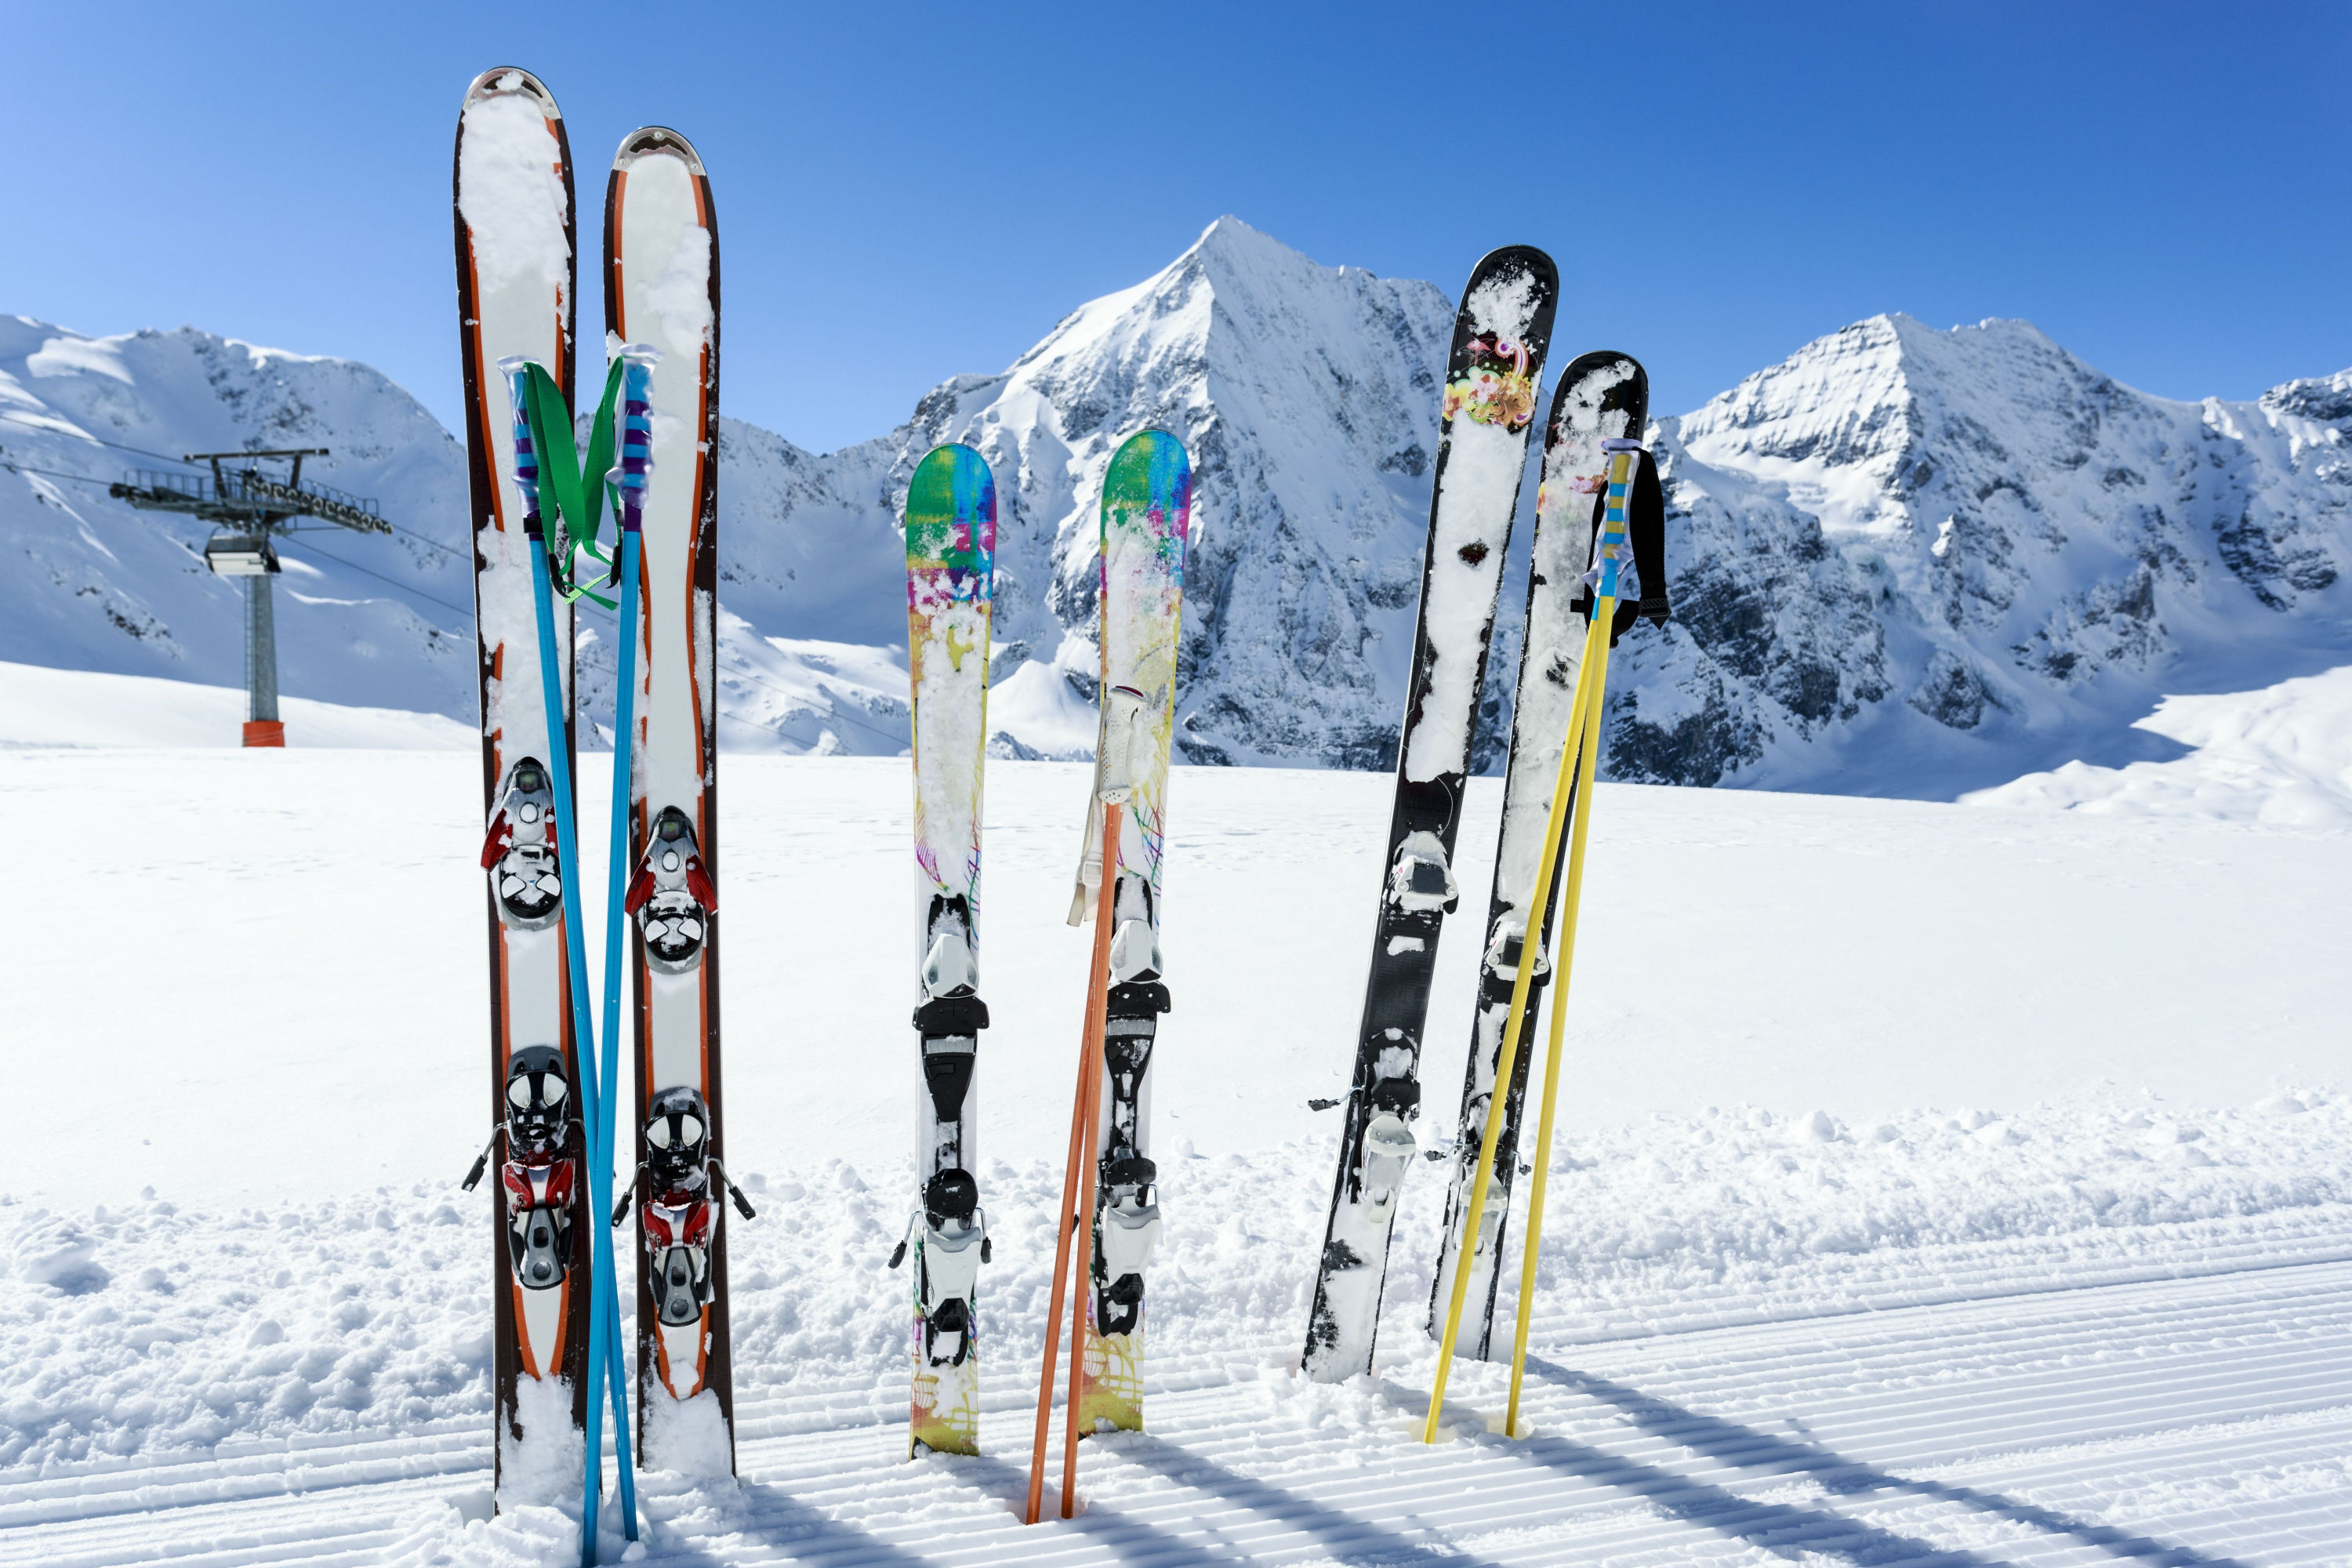 Rock the après-ski party this winter with our guide - The Manual